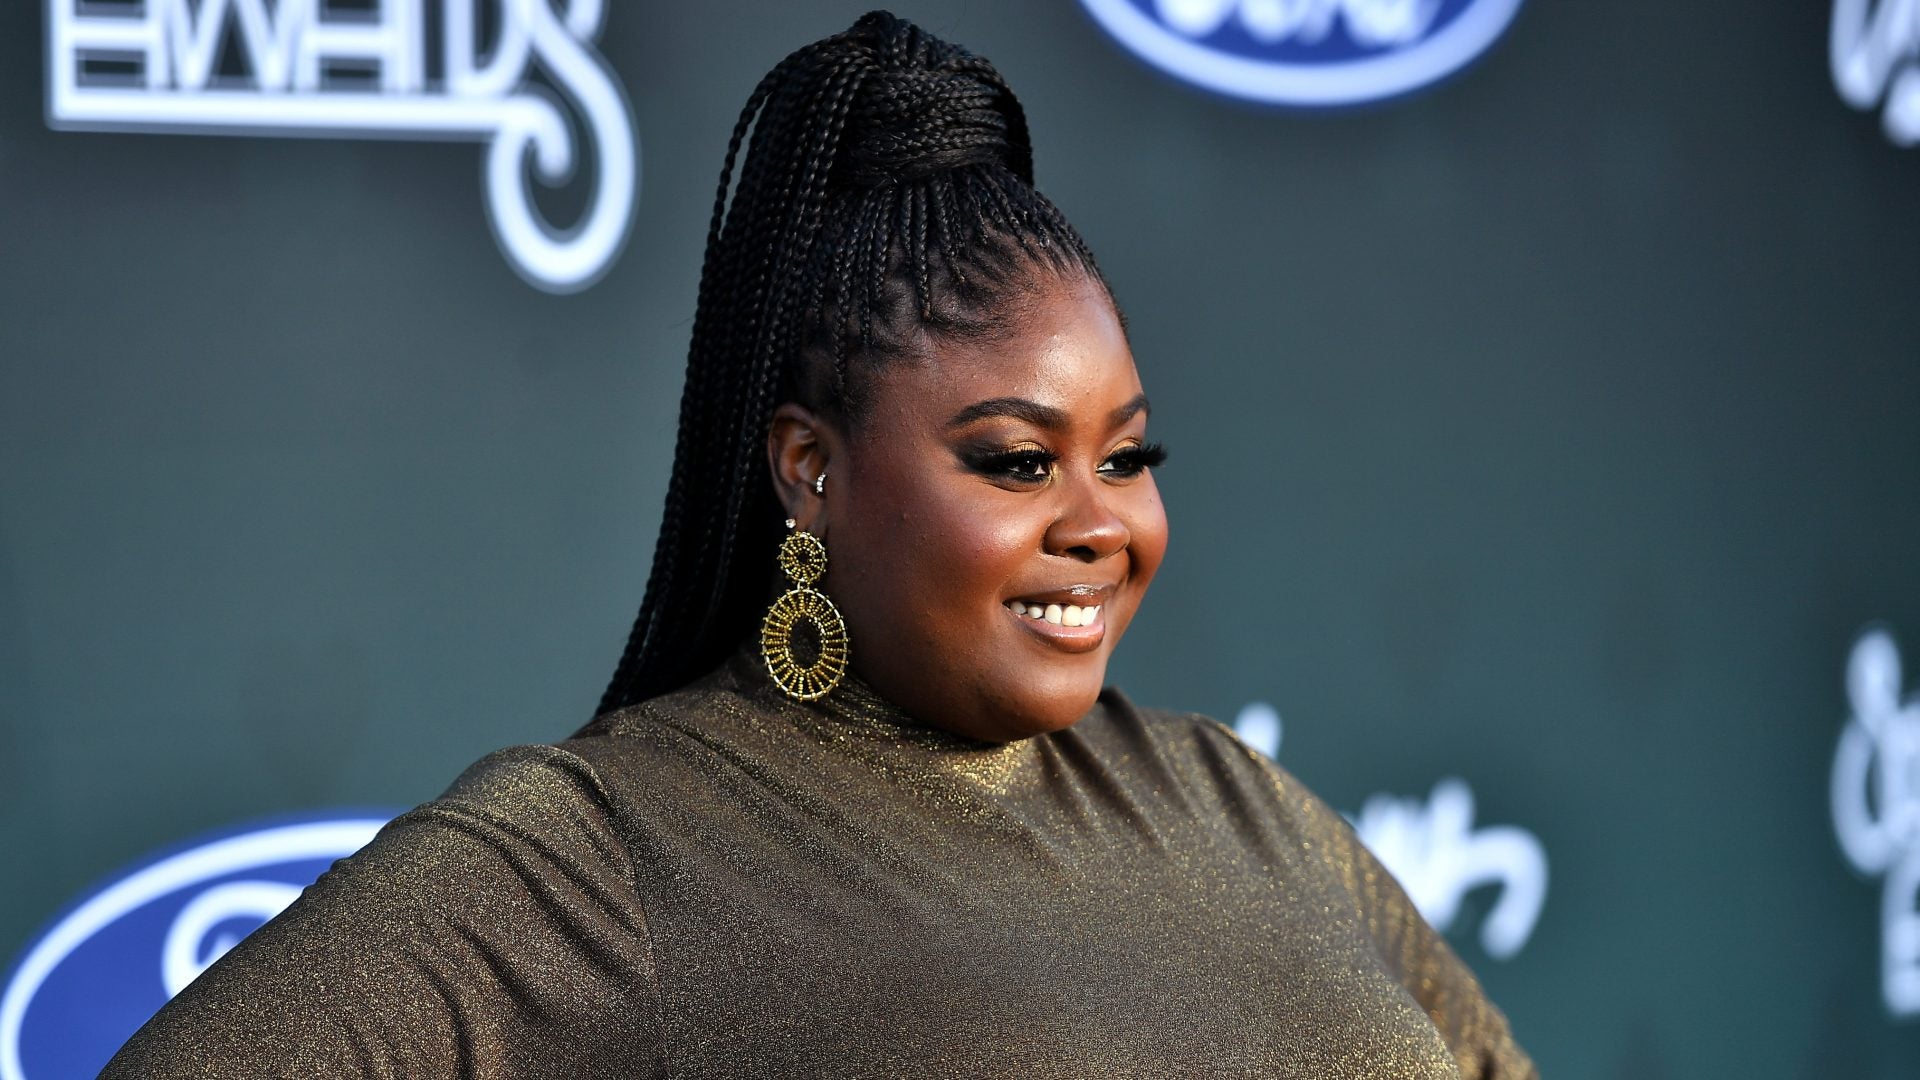 Actress Raven Goodwin Has The Cutest Pregnancy Glow